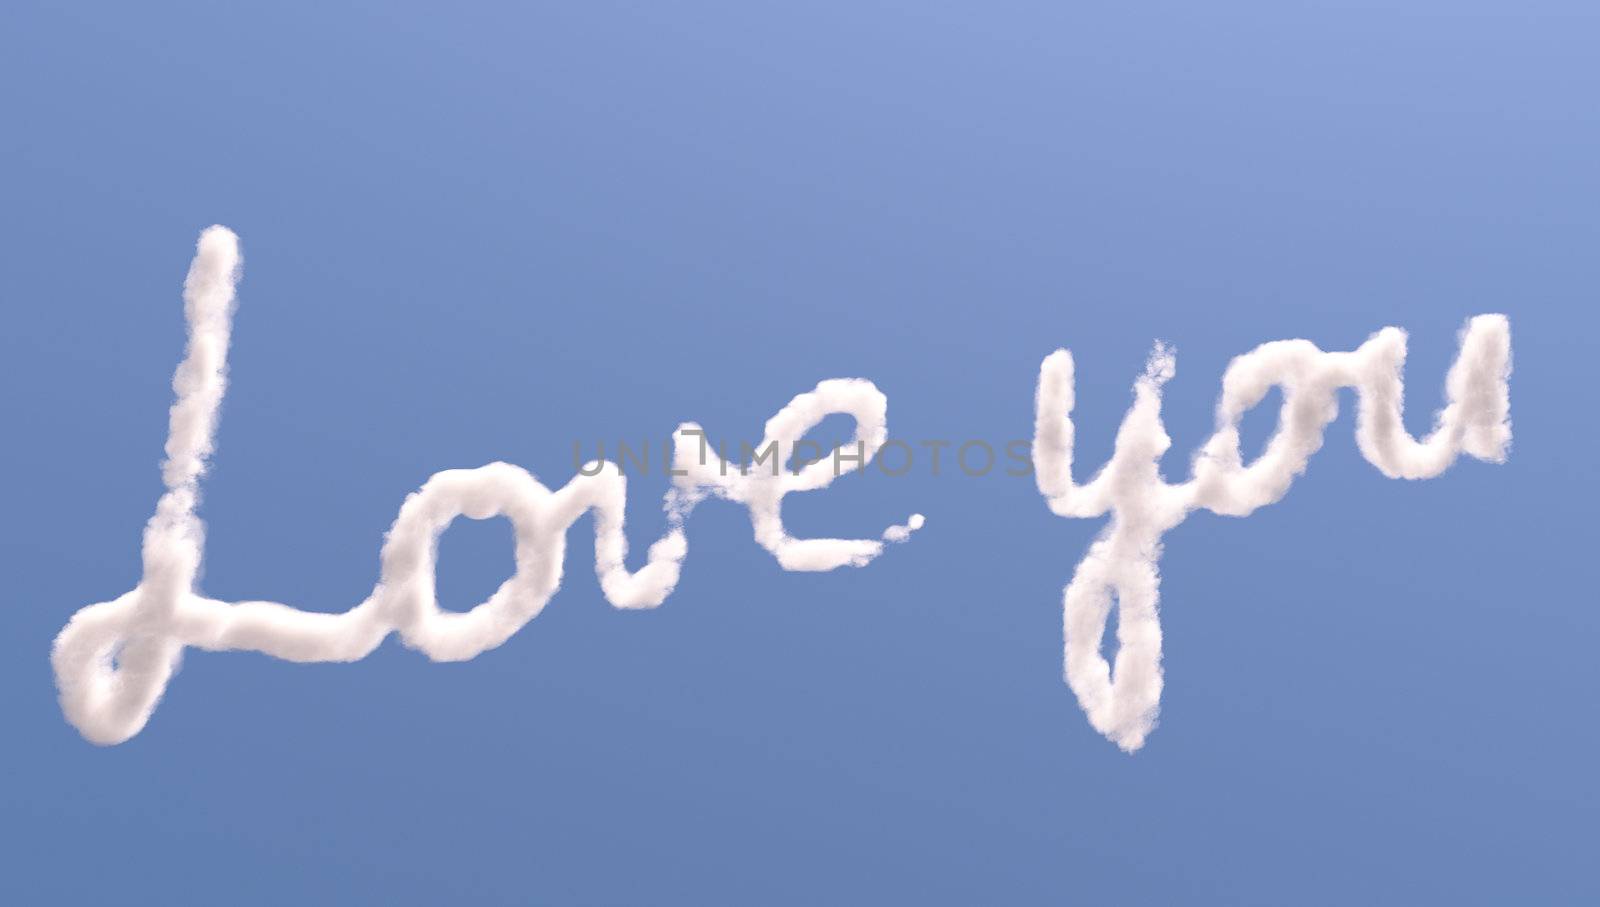 Love you text in sky by Zelfit